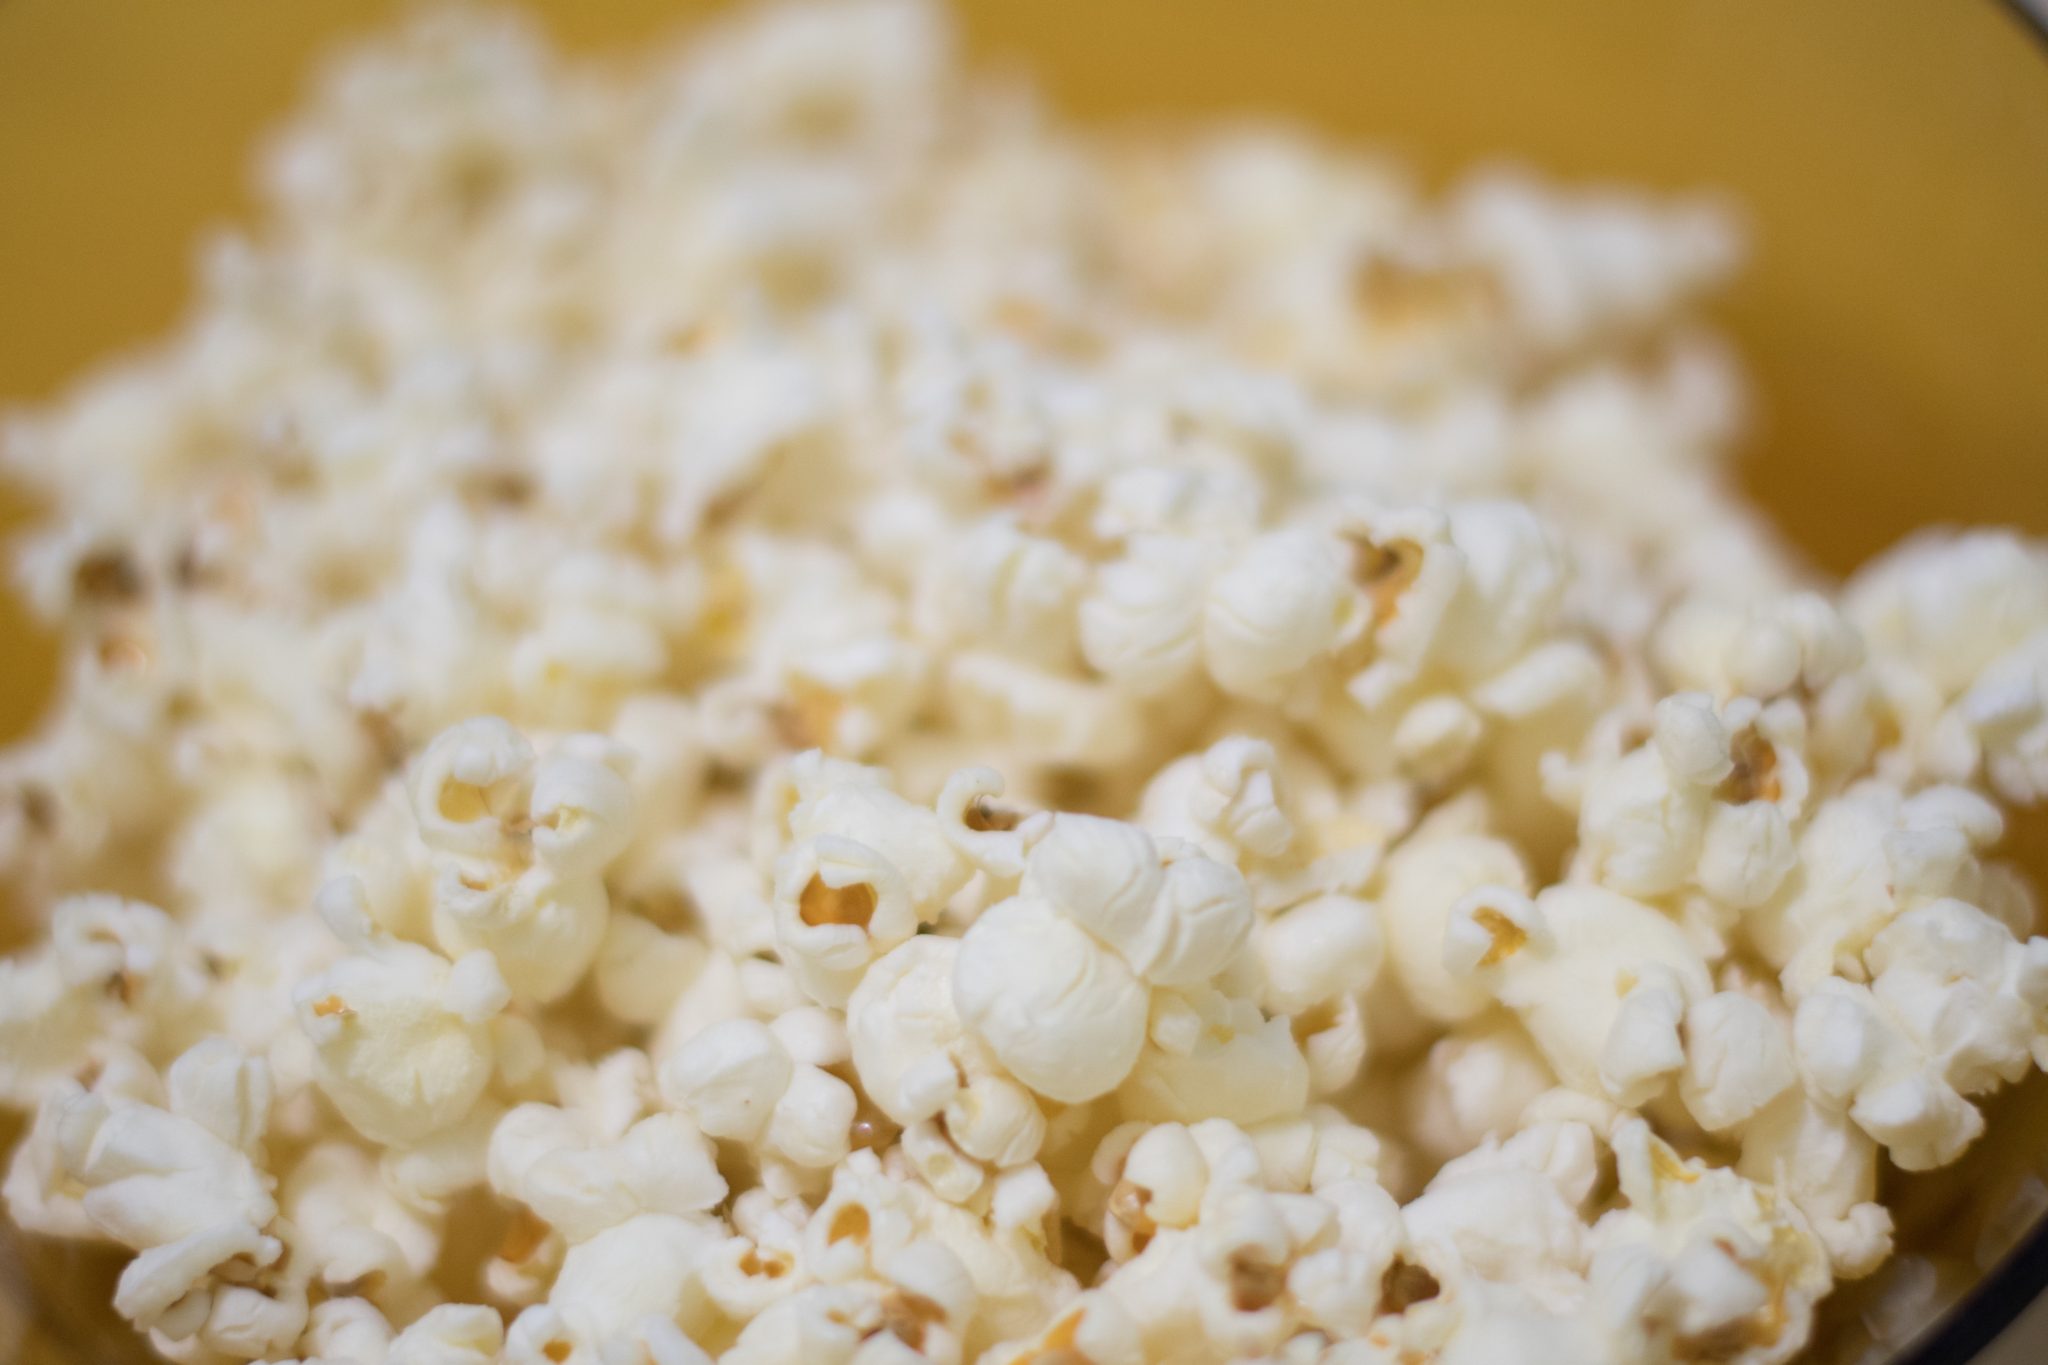 Eat popcorn with no chemicals